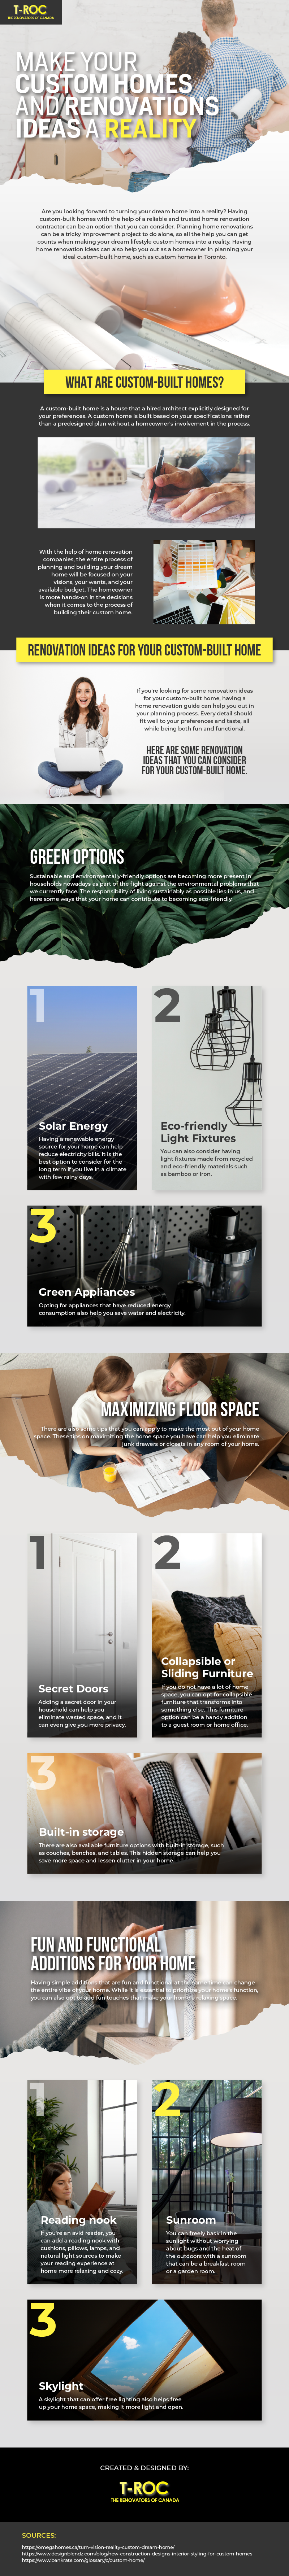 Make Your Custom Homes and Renovations Ideas a Reality (infographic) 